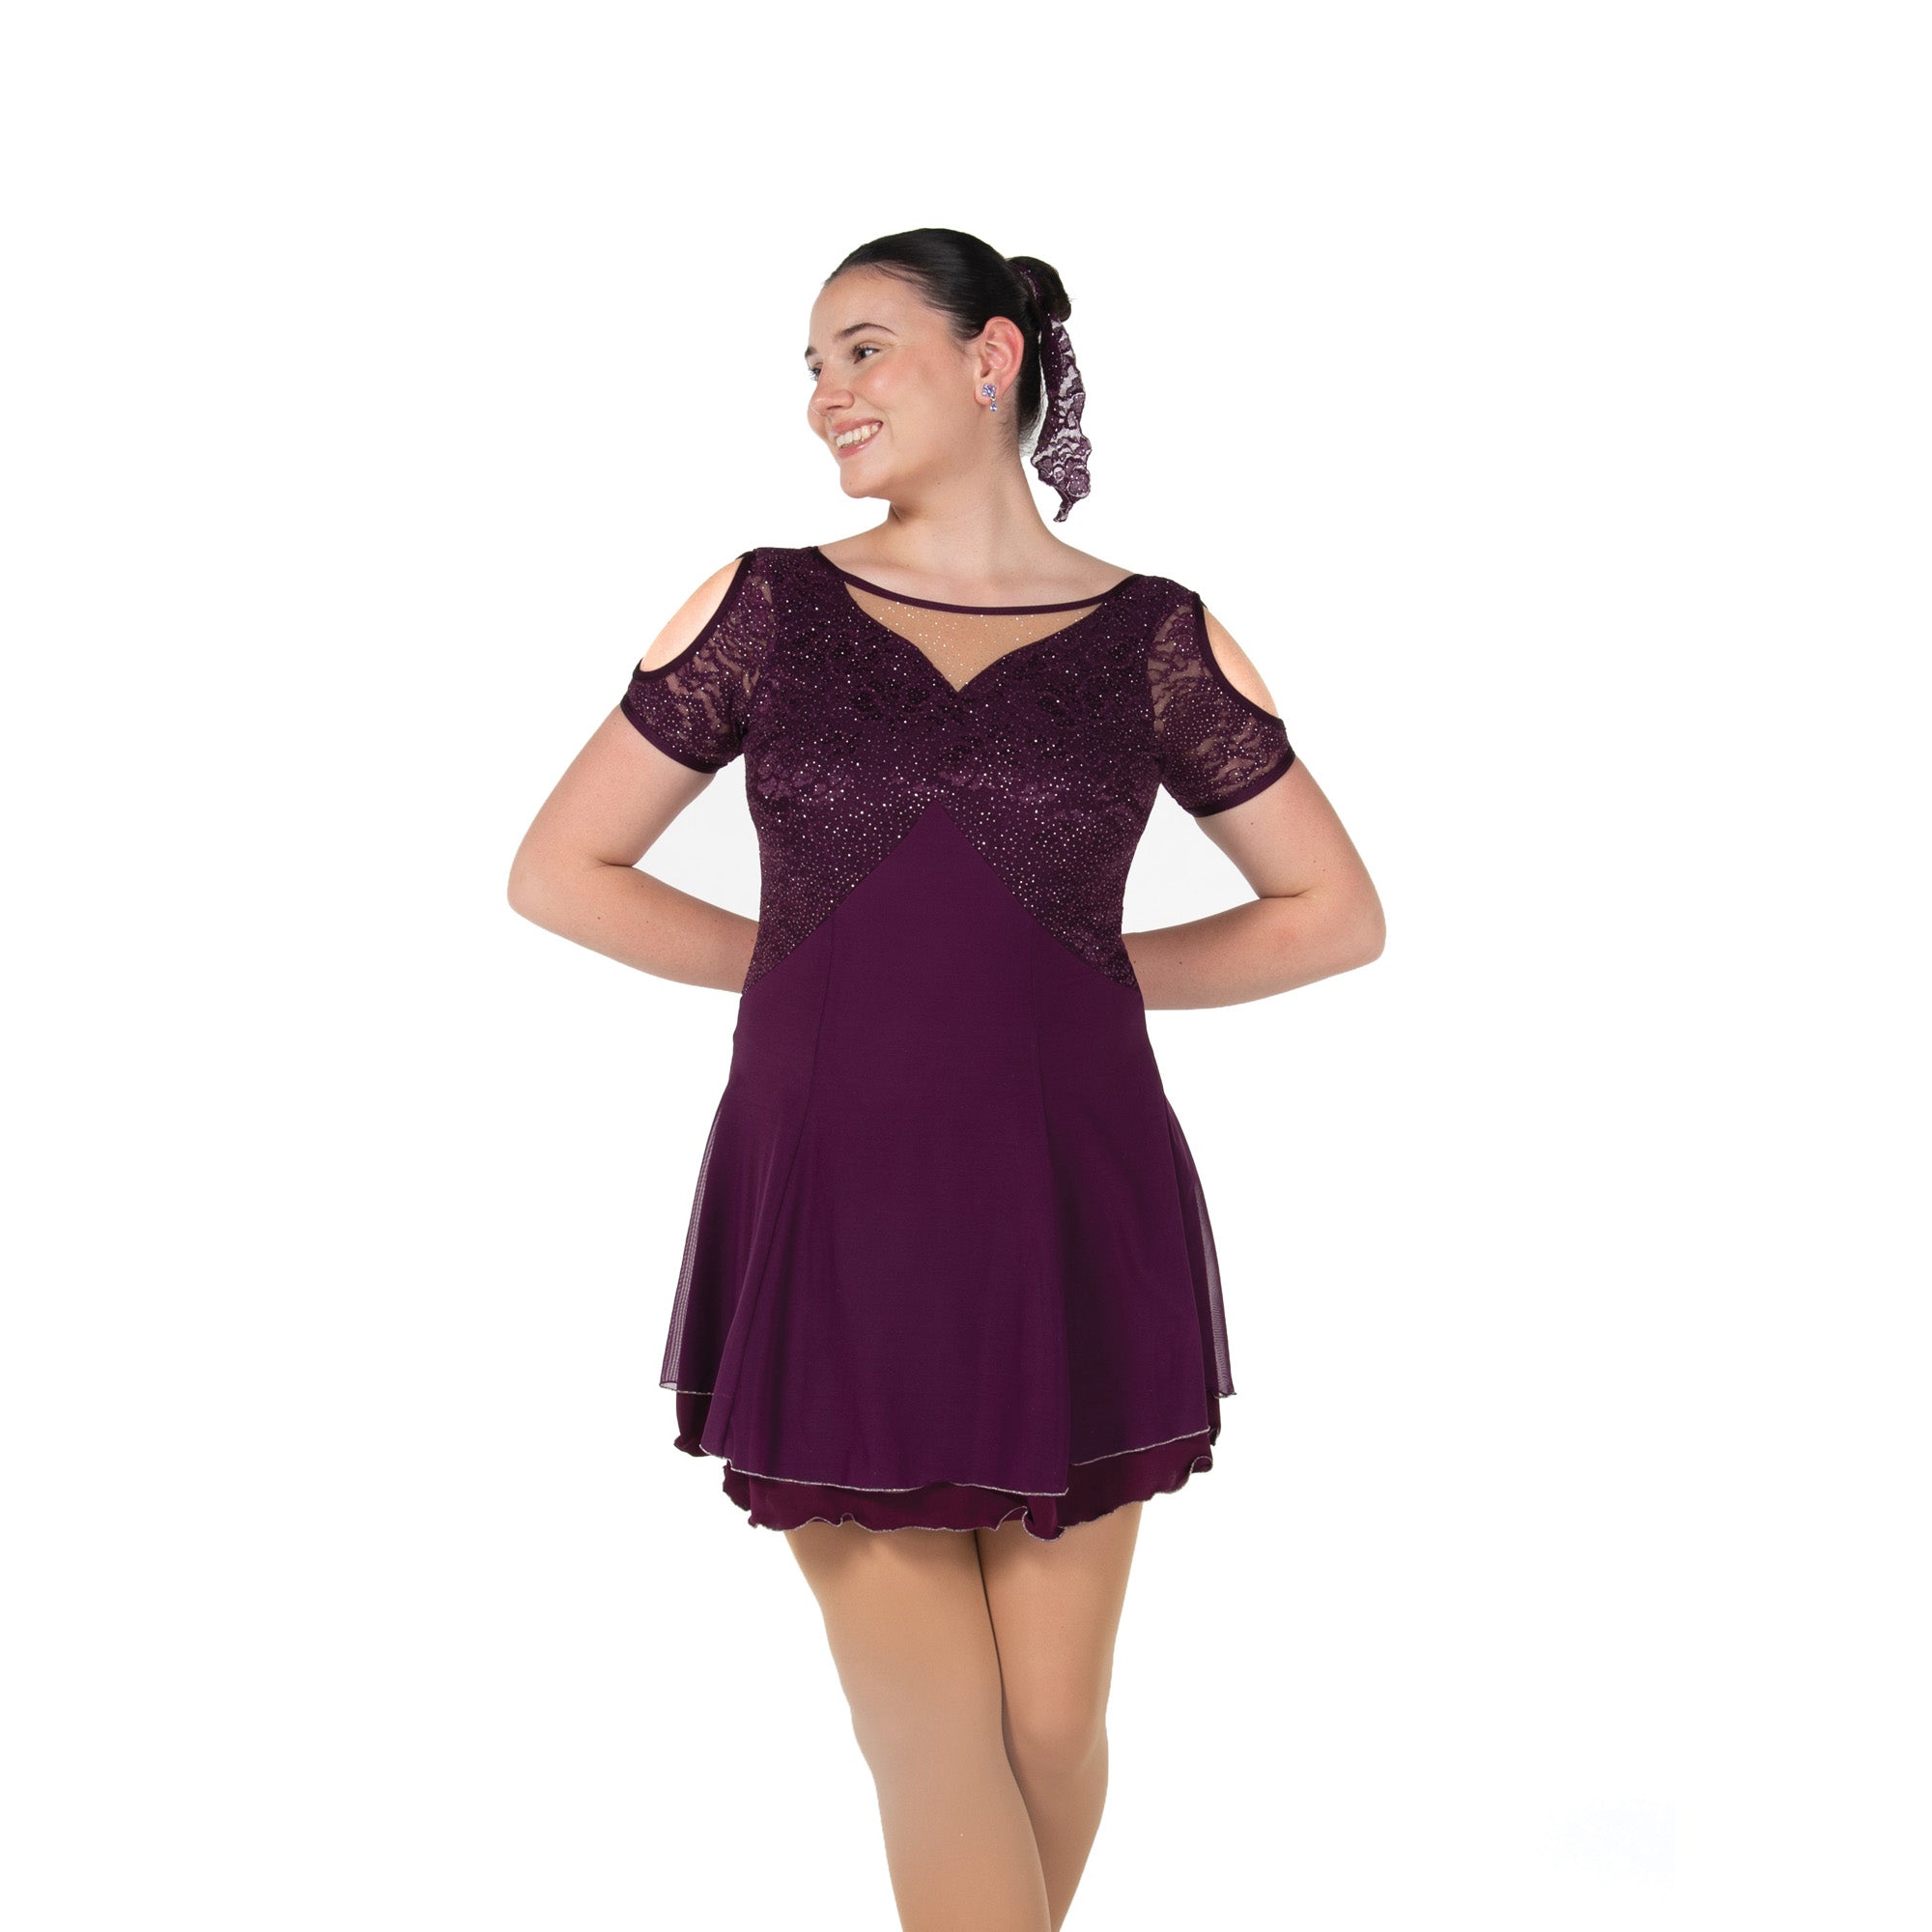 45 Empiresque Skating Dress in Deep Purple by Jerry's